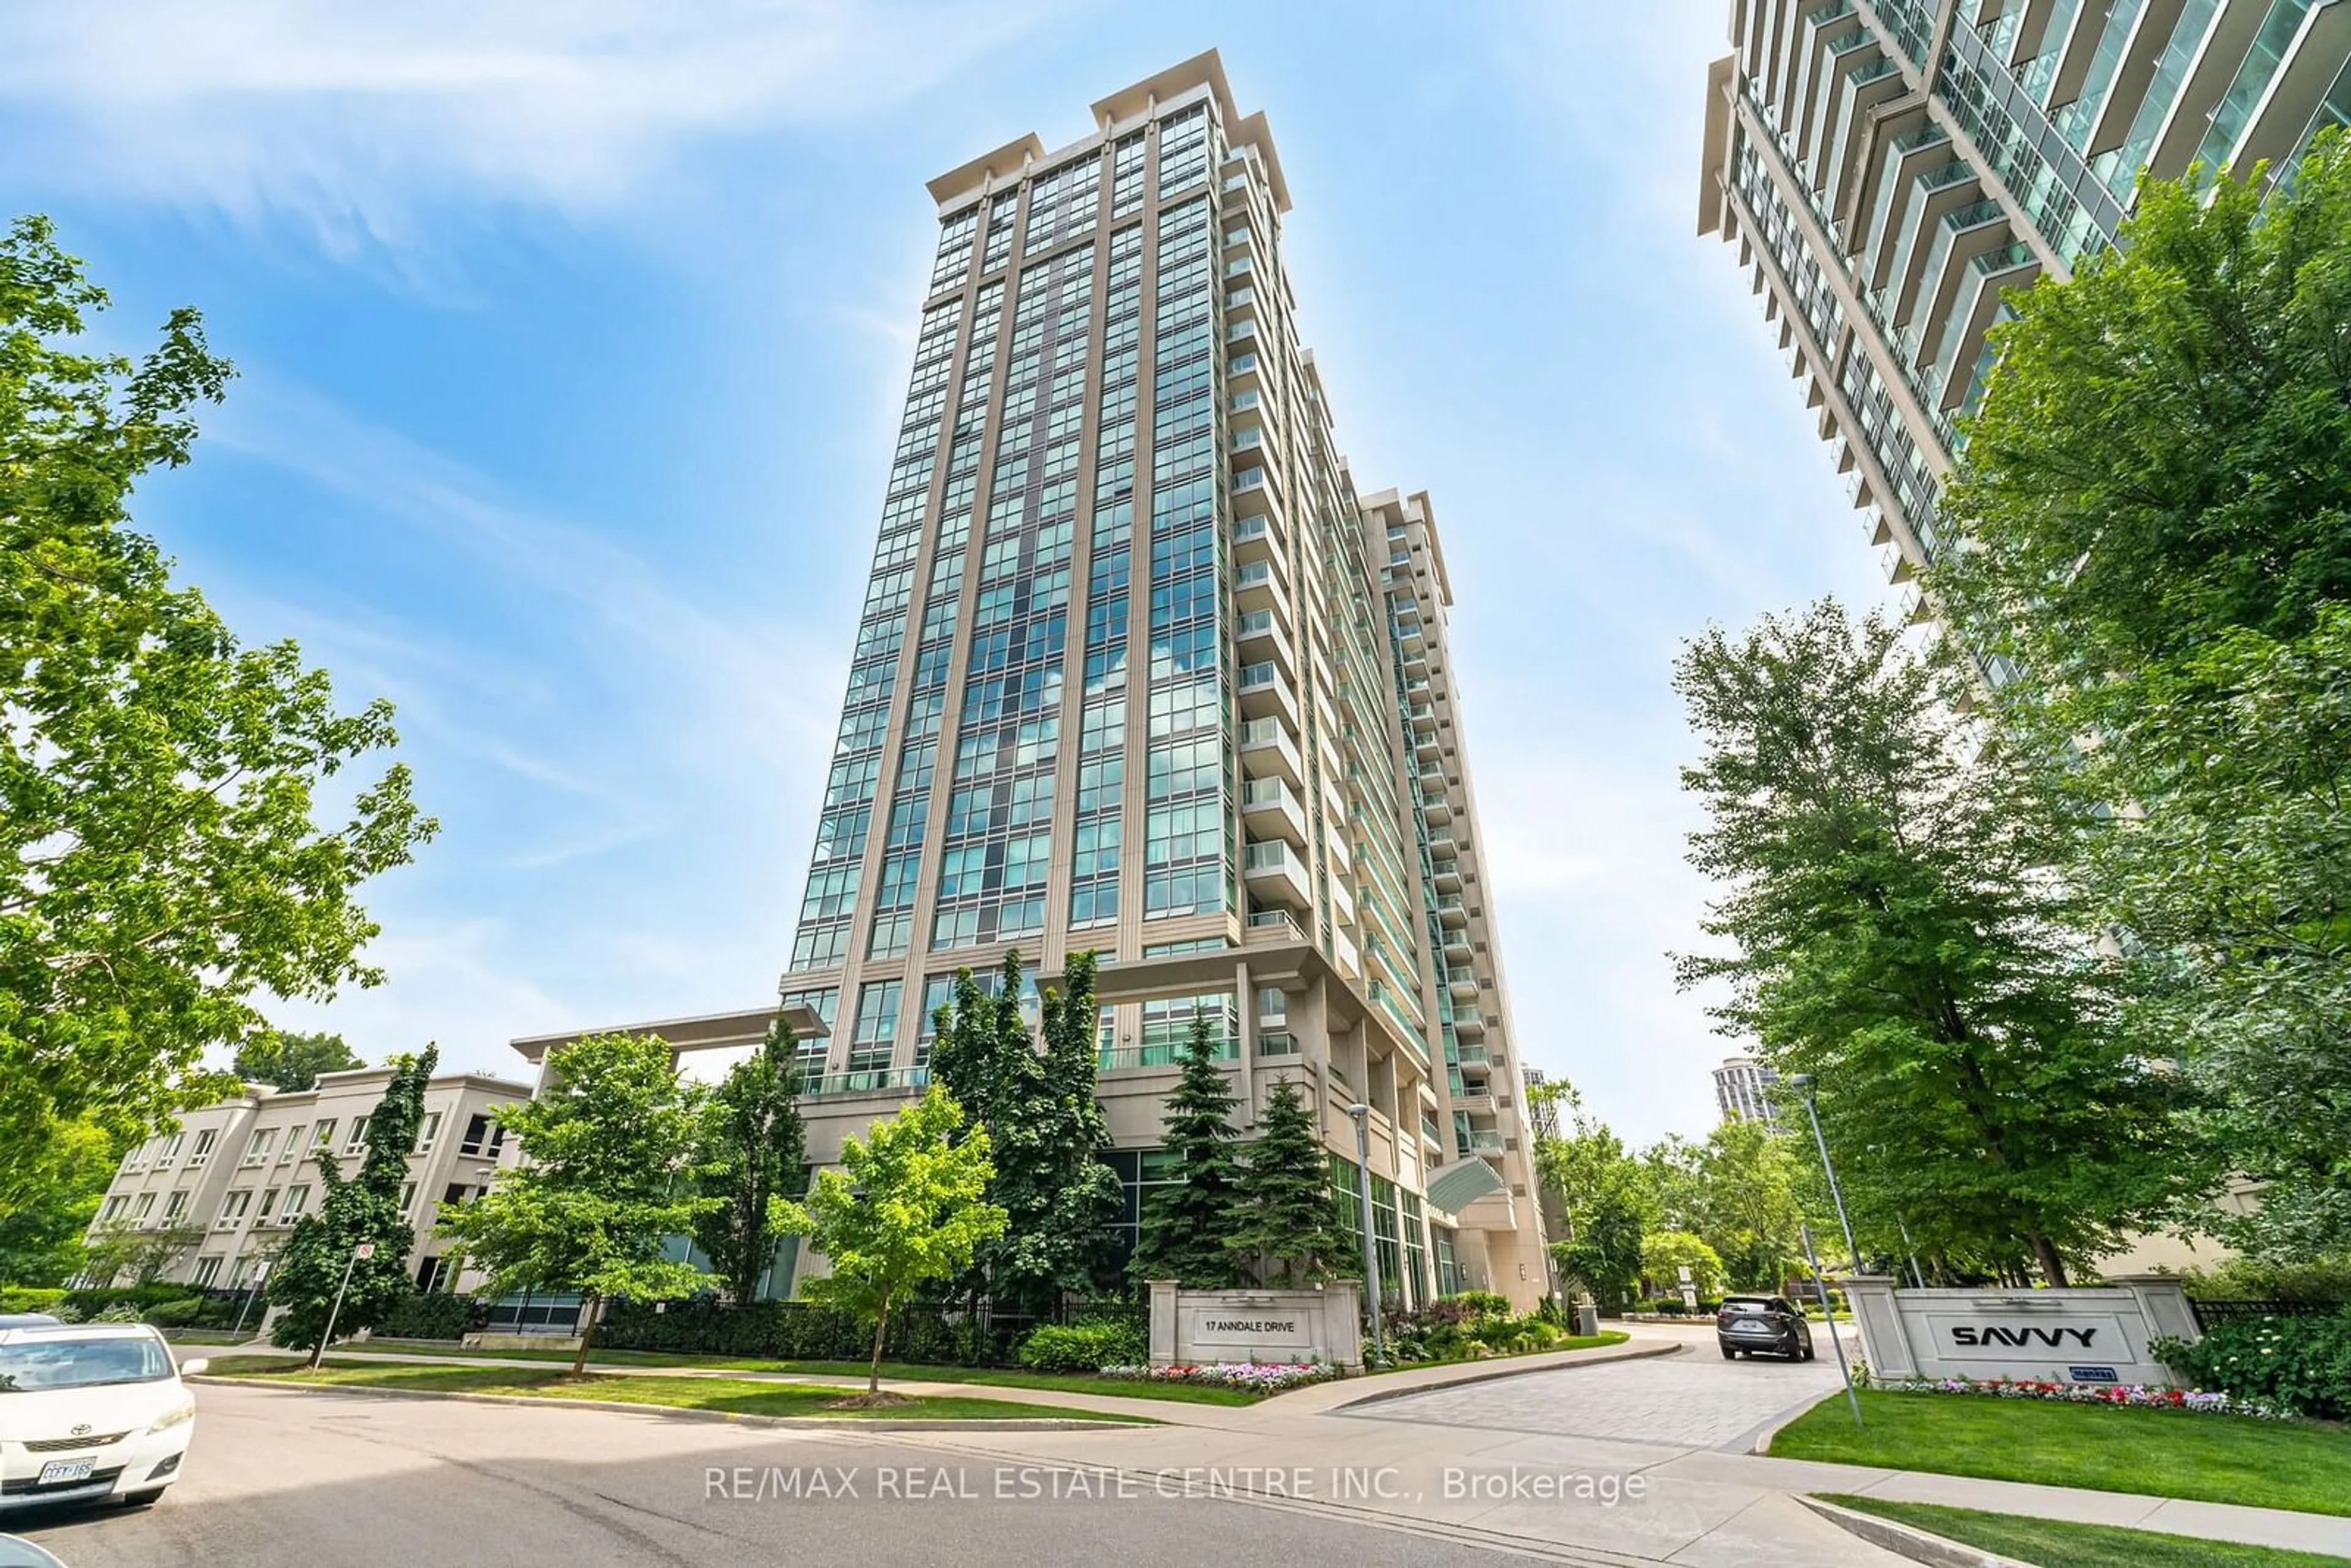 A pic from exterior of the house or condo for 17 Anndale Dr #906, Toronto Ontario M2N 2W7